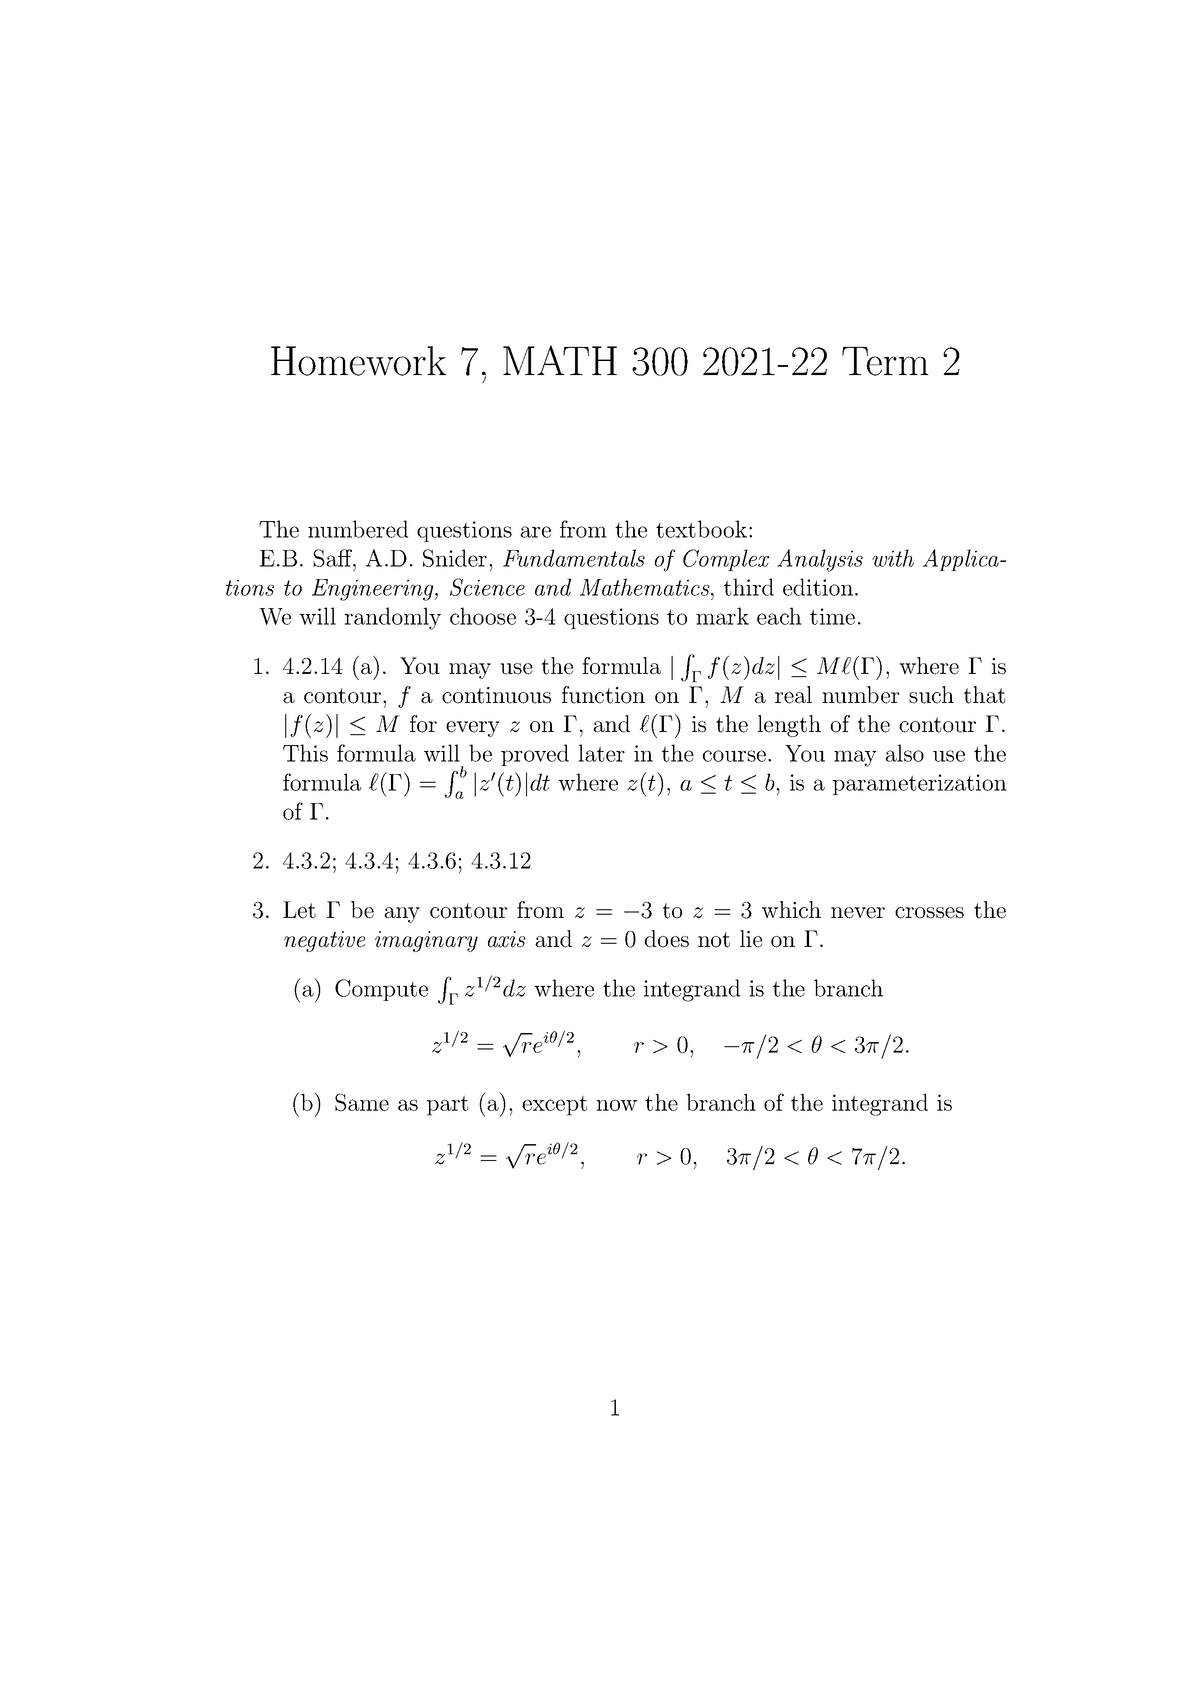 Homework 7 Assignment 7 Homework 7 Math 300 2021 22 Term 2 The Numbered Questions Are From